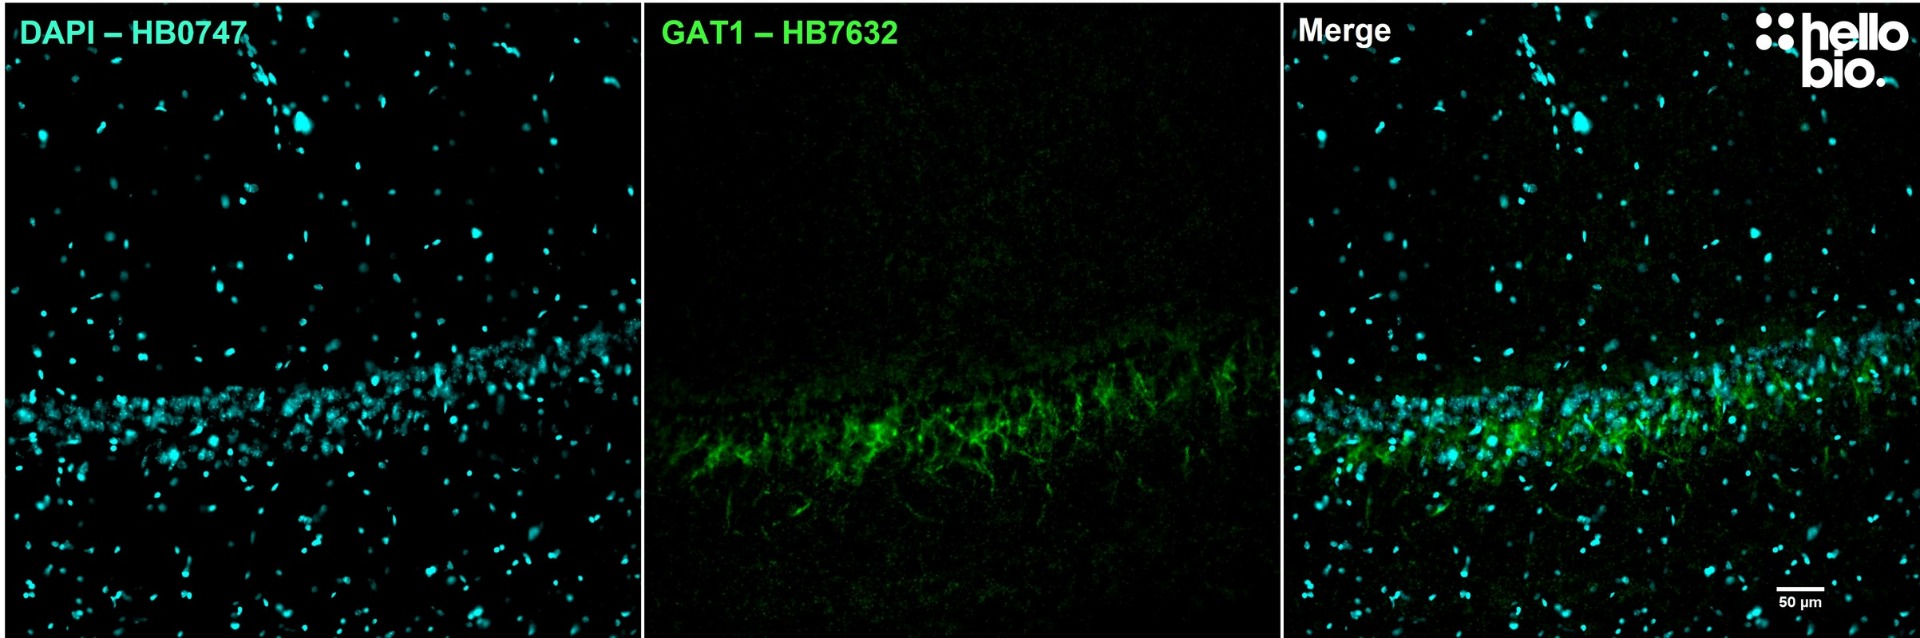 Figure 3. GAT1 staining in the GABAergic interneurons of hippocampal CA1 using HB7632.